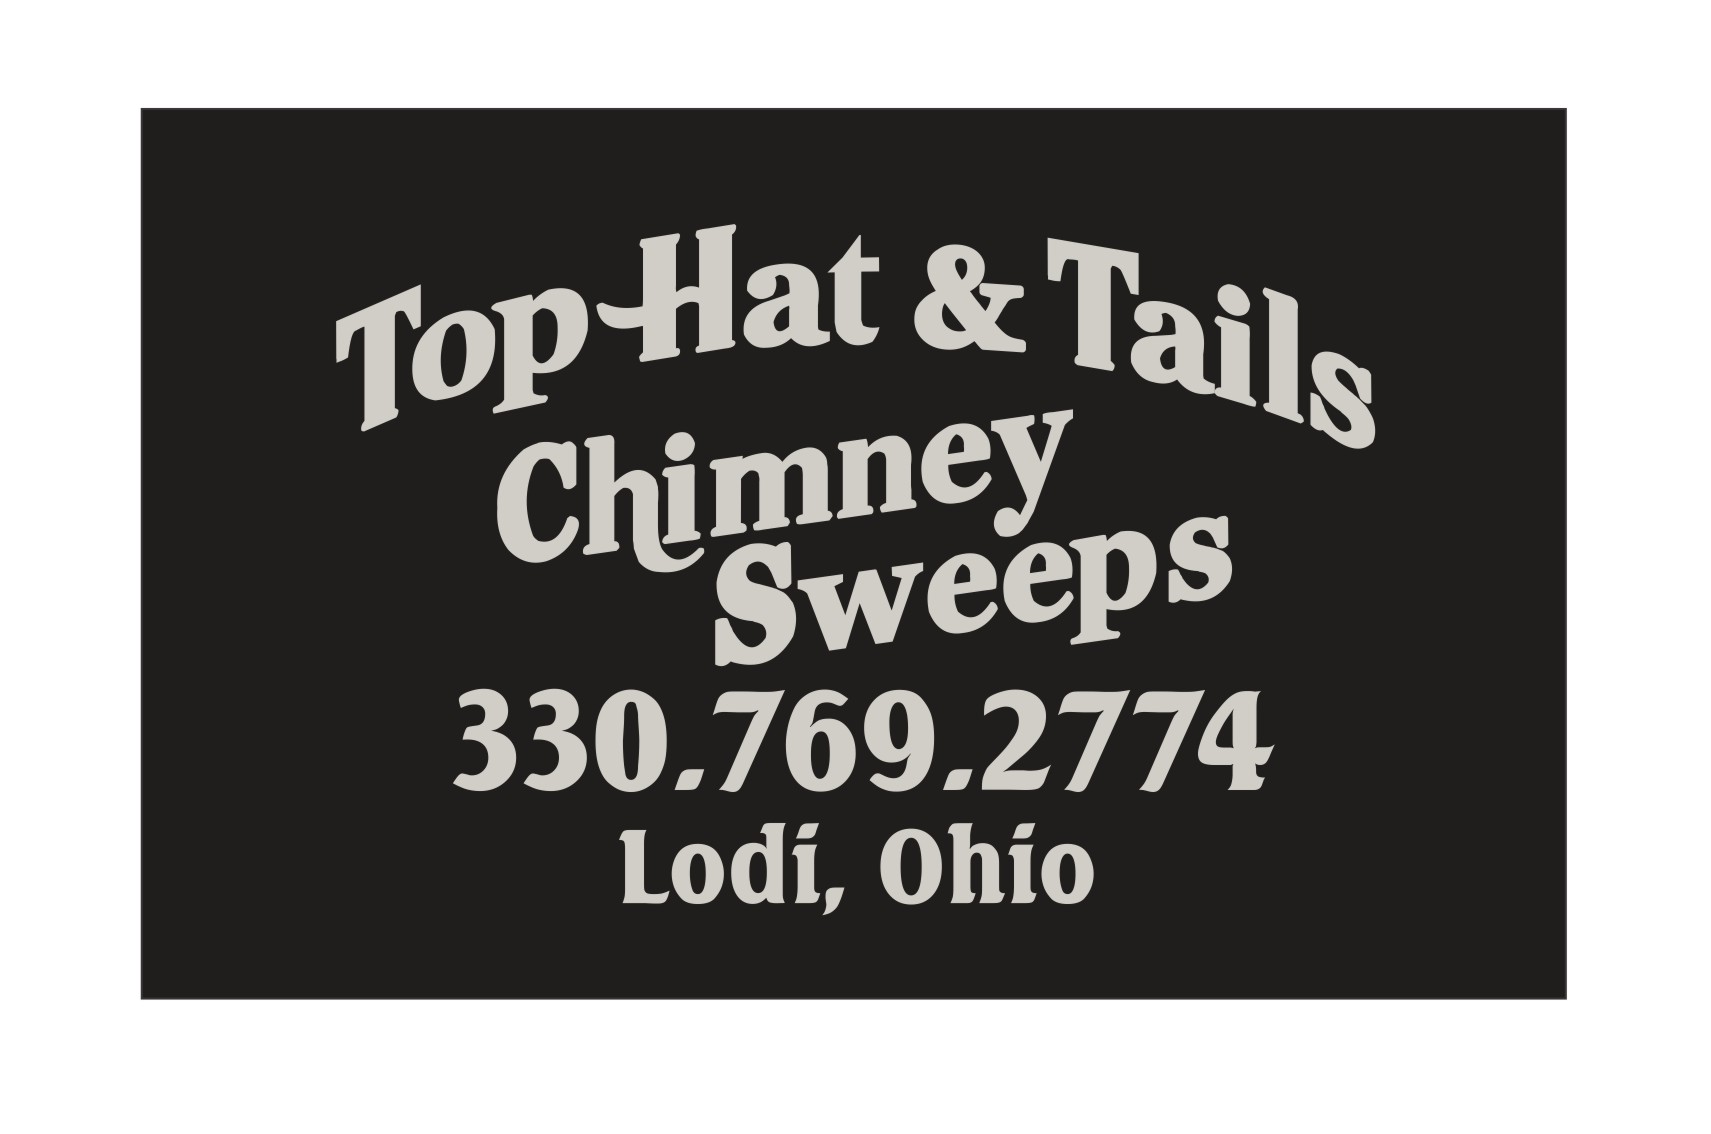 Top Hat & Tails-Chimney Sweeps